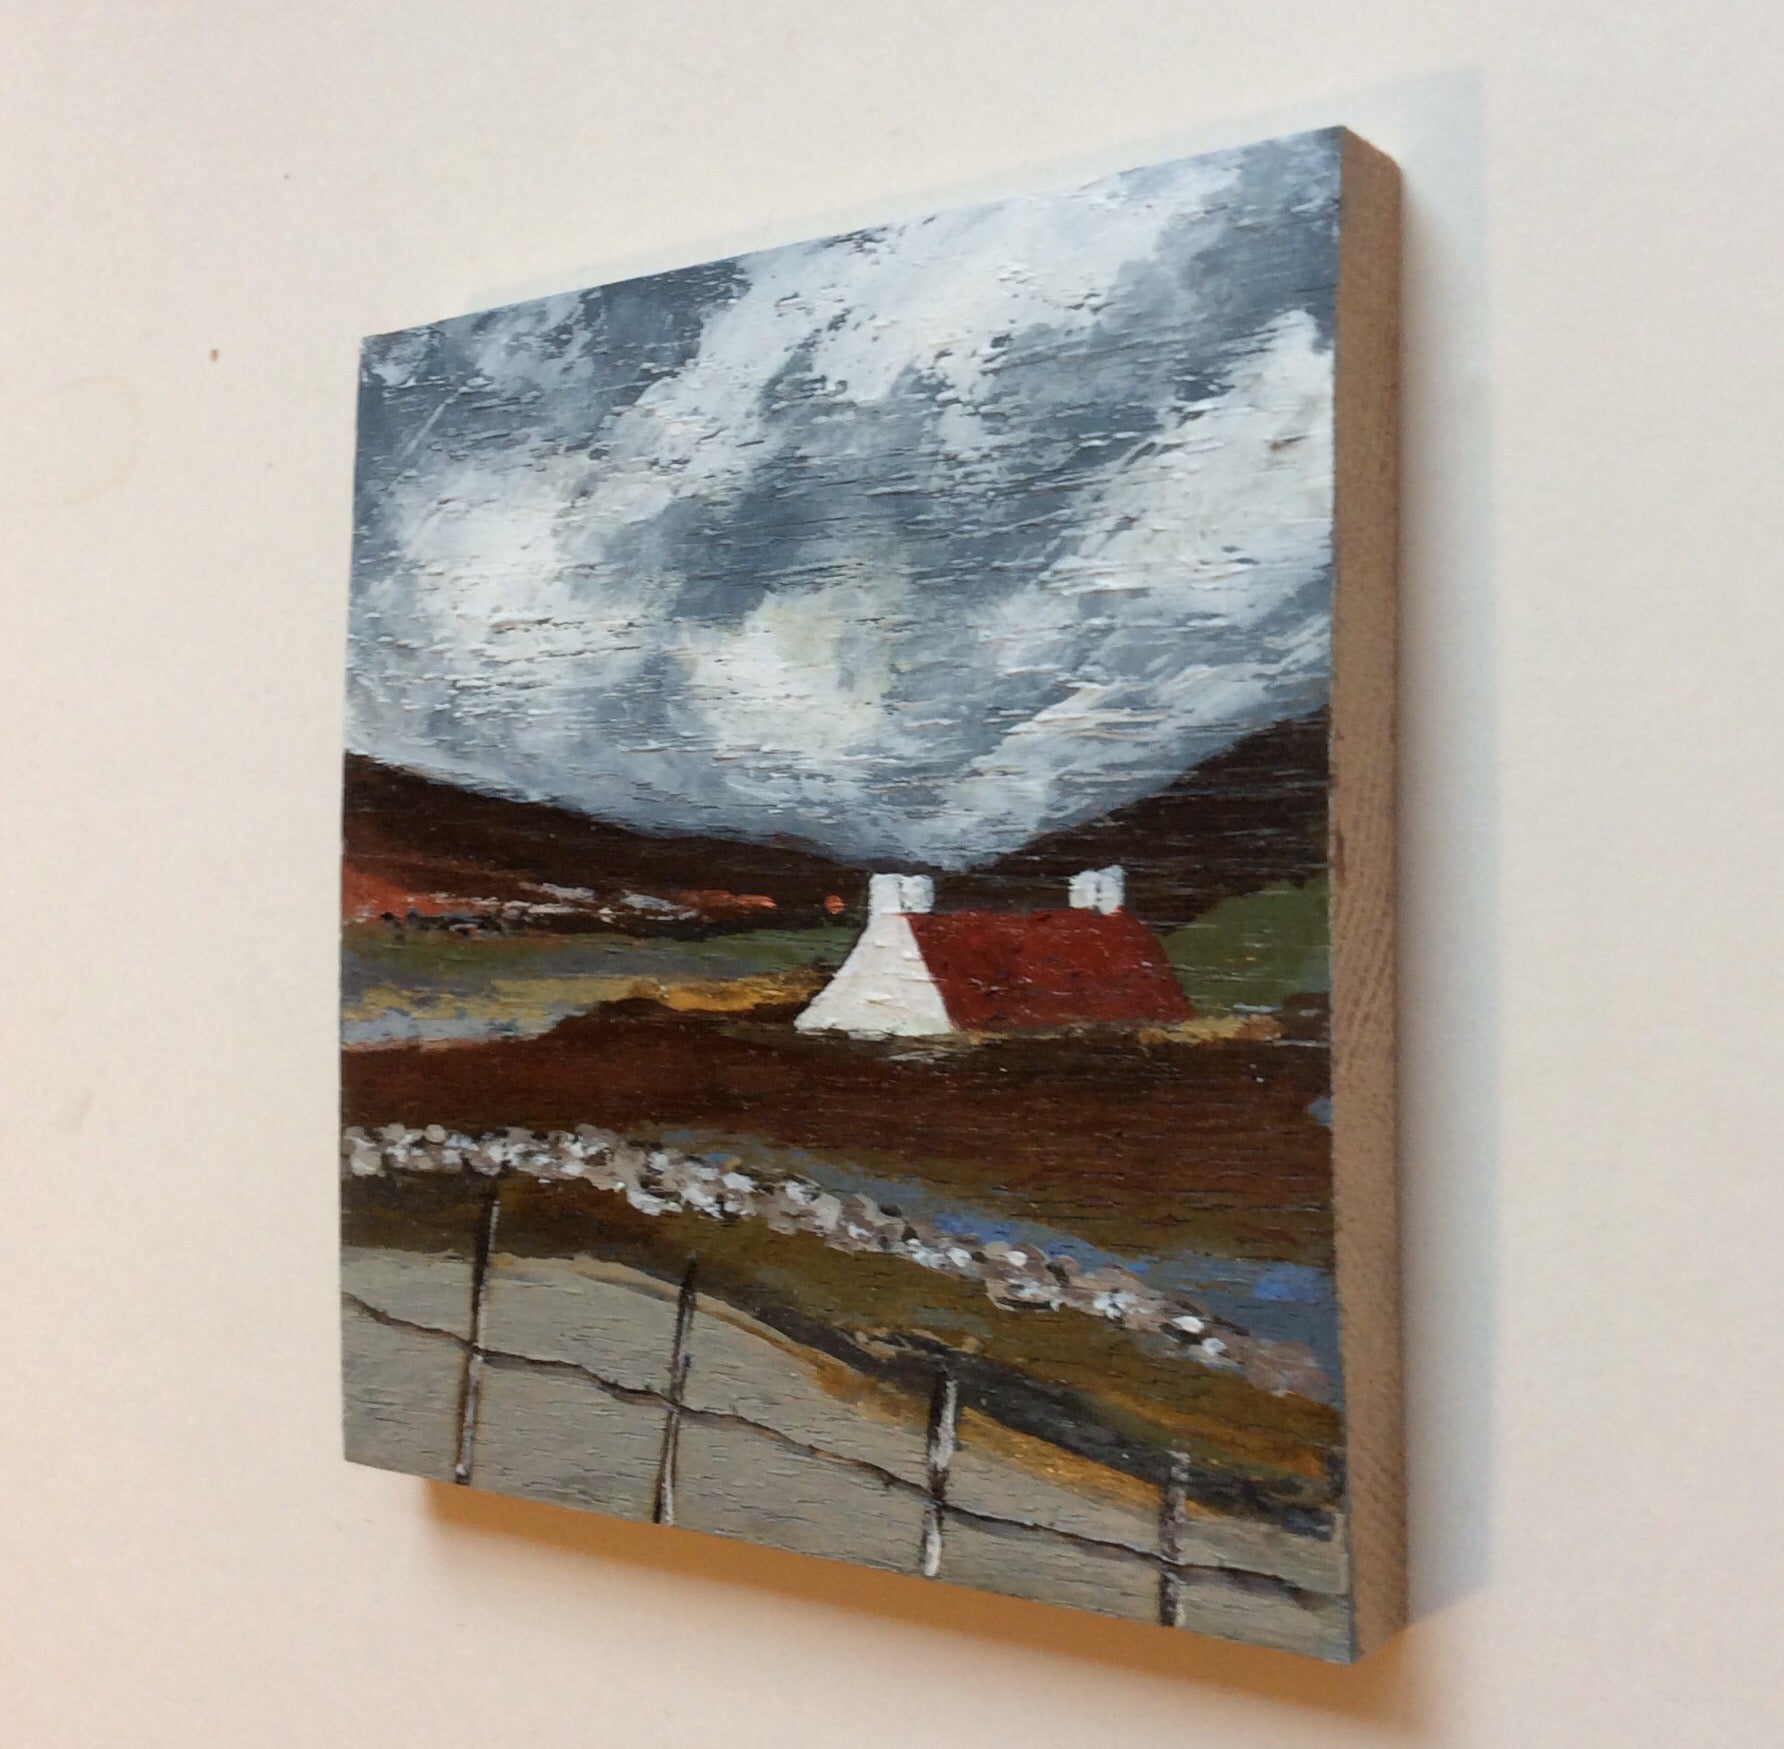 Mixed Media Art on wood By Louise O'Hara - "Storm clouds”